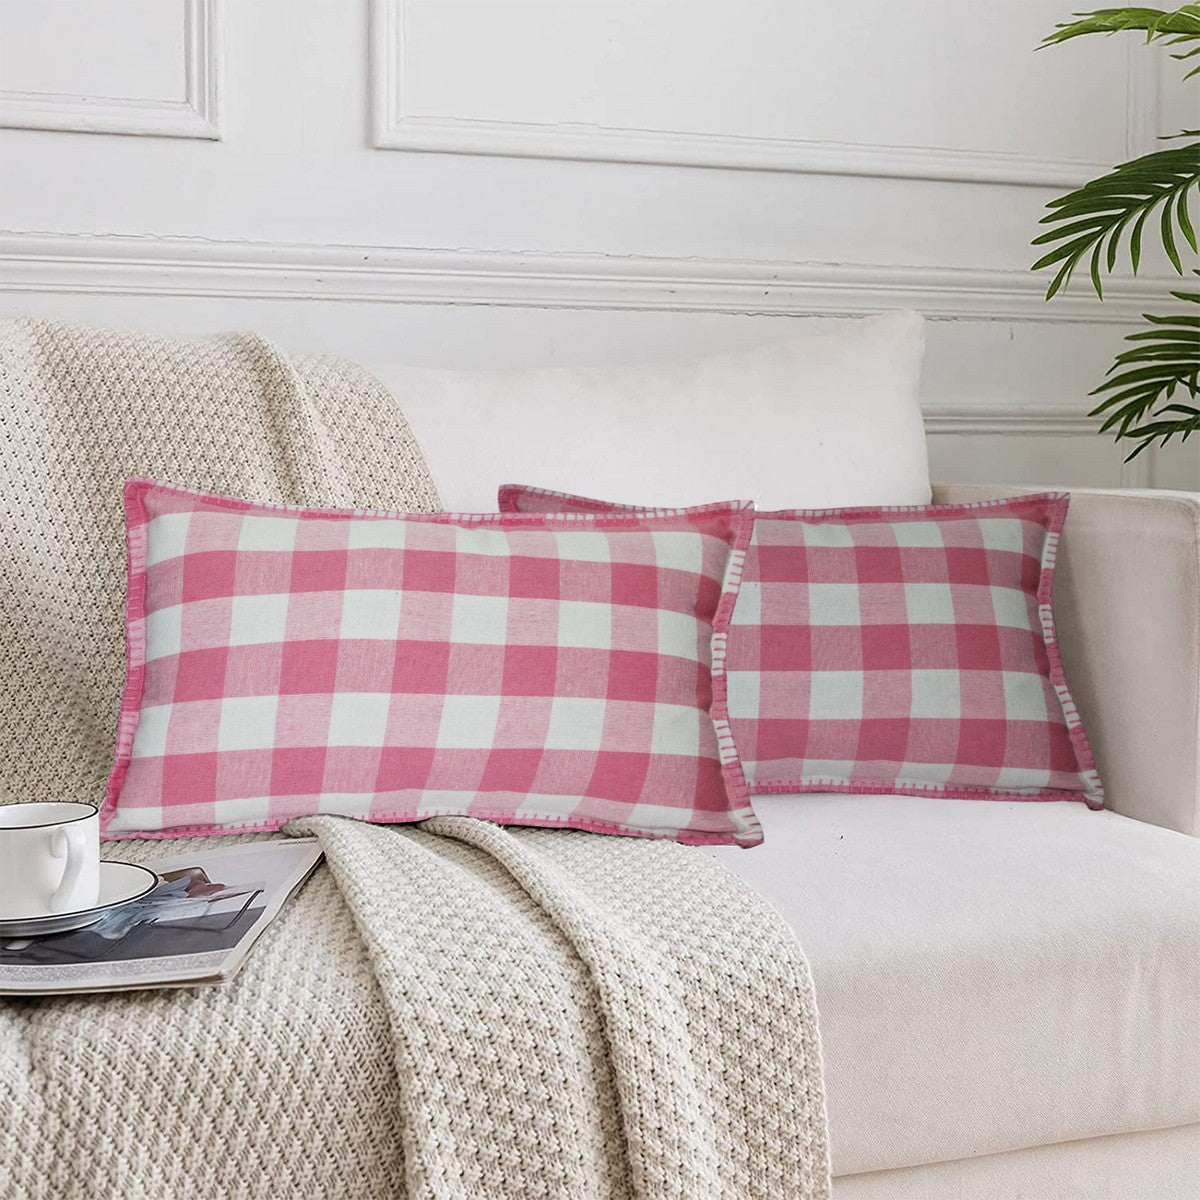 Lushomes Rectangle Cushion Cover with Blanket Stitch, Cotton Sofa Pillow Cover Set of 2, 12x20 Inch, Big Checks, Pink and White Checks, Pillow Cushions Covers (Pack of 2, 30x50 Cms)